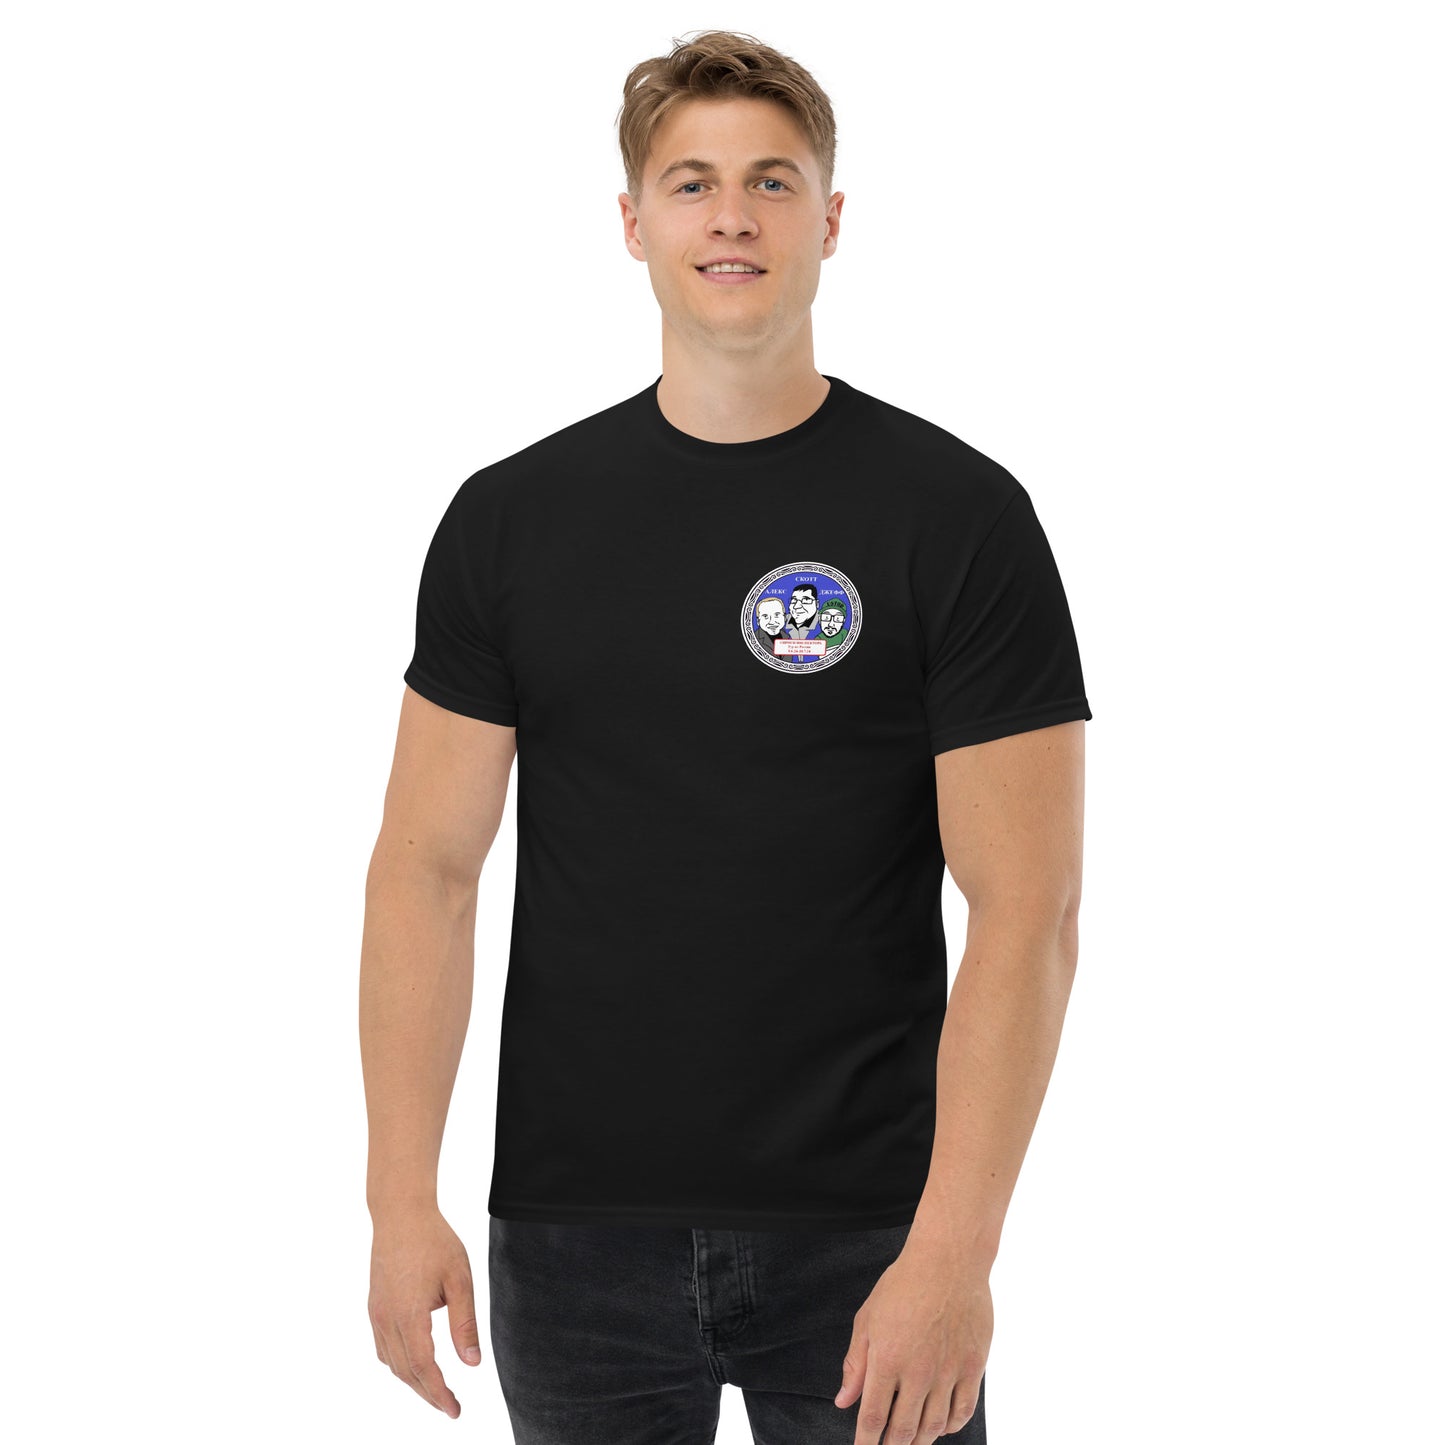 The Real Russia Tour T-Shirt Men's Classic